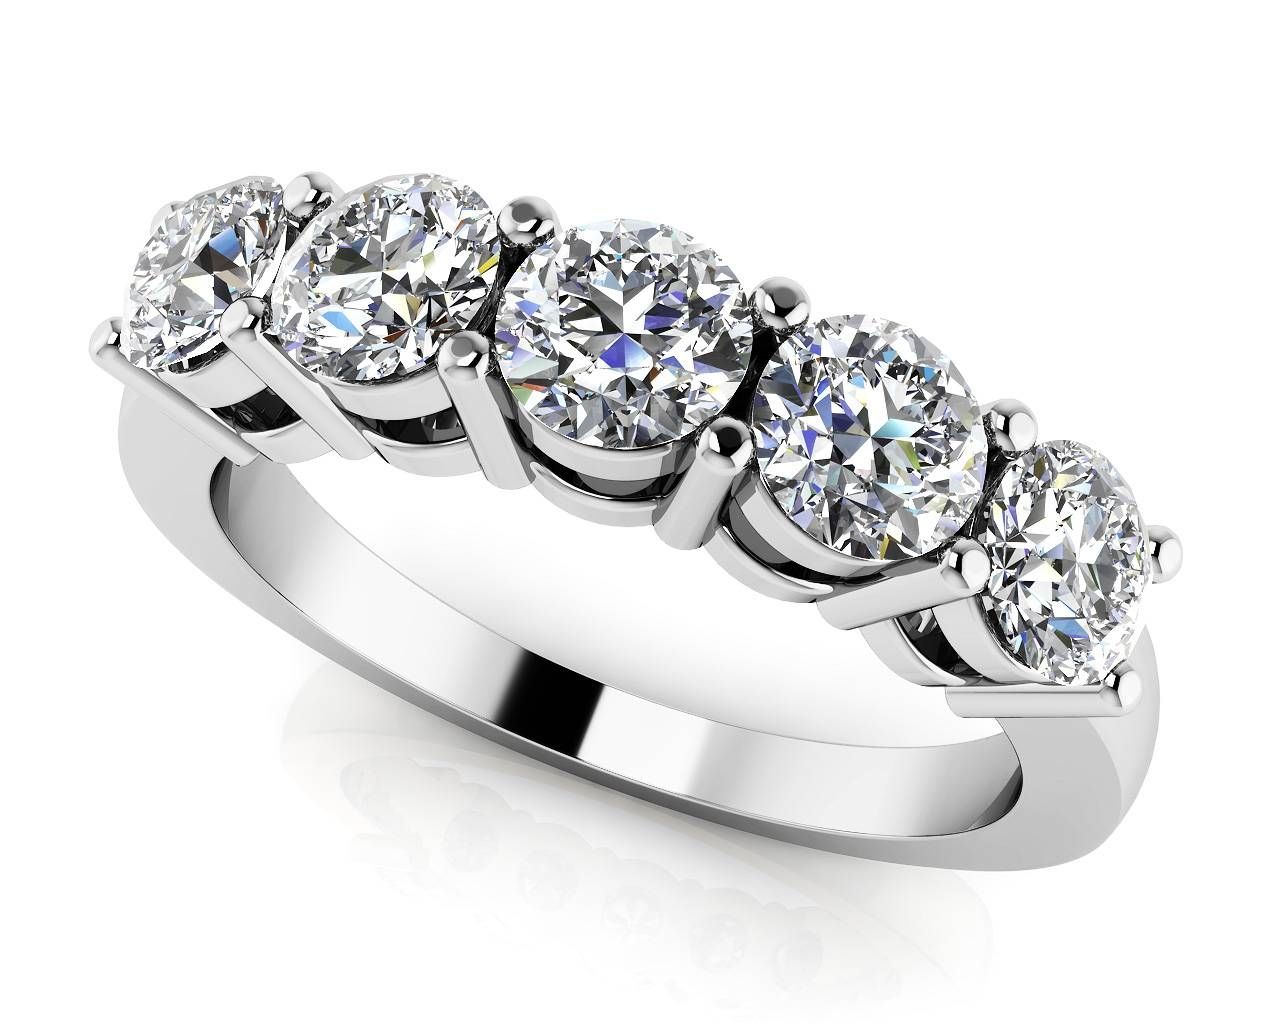 Design Your Own Diamond Anniversary Ring & Eternity Ring For Latest Wedding Anniversary Rings (View 5 of 25)